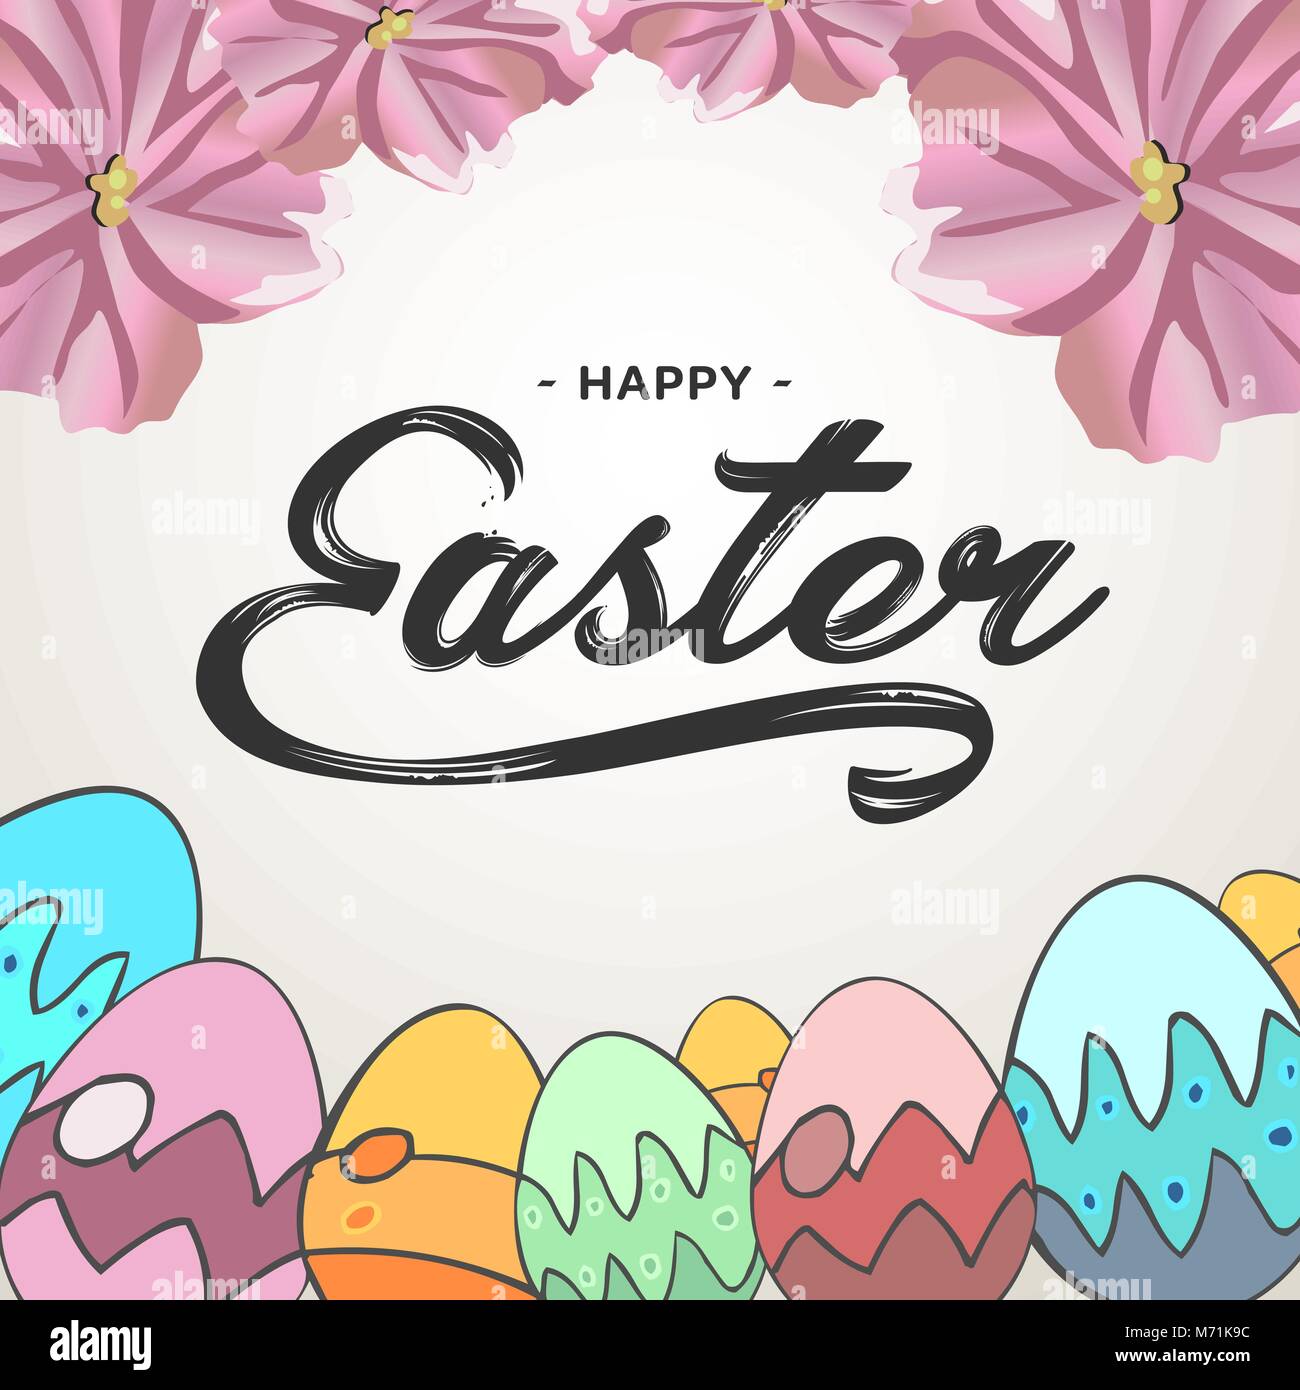 Happy Easter lettering greeting text vector illustration. Happy easter image. Stock Vector